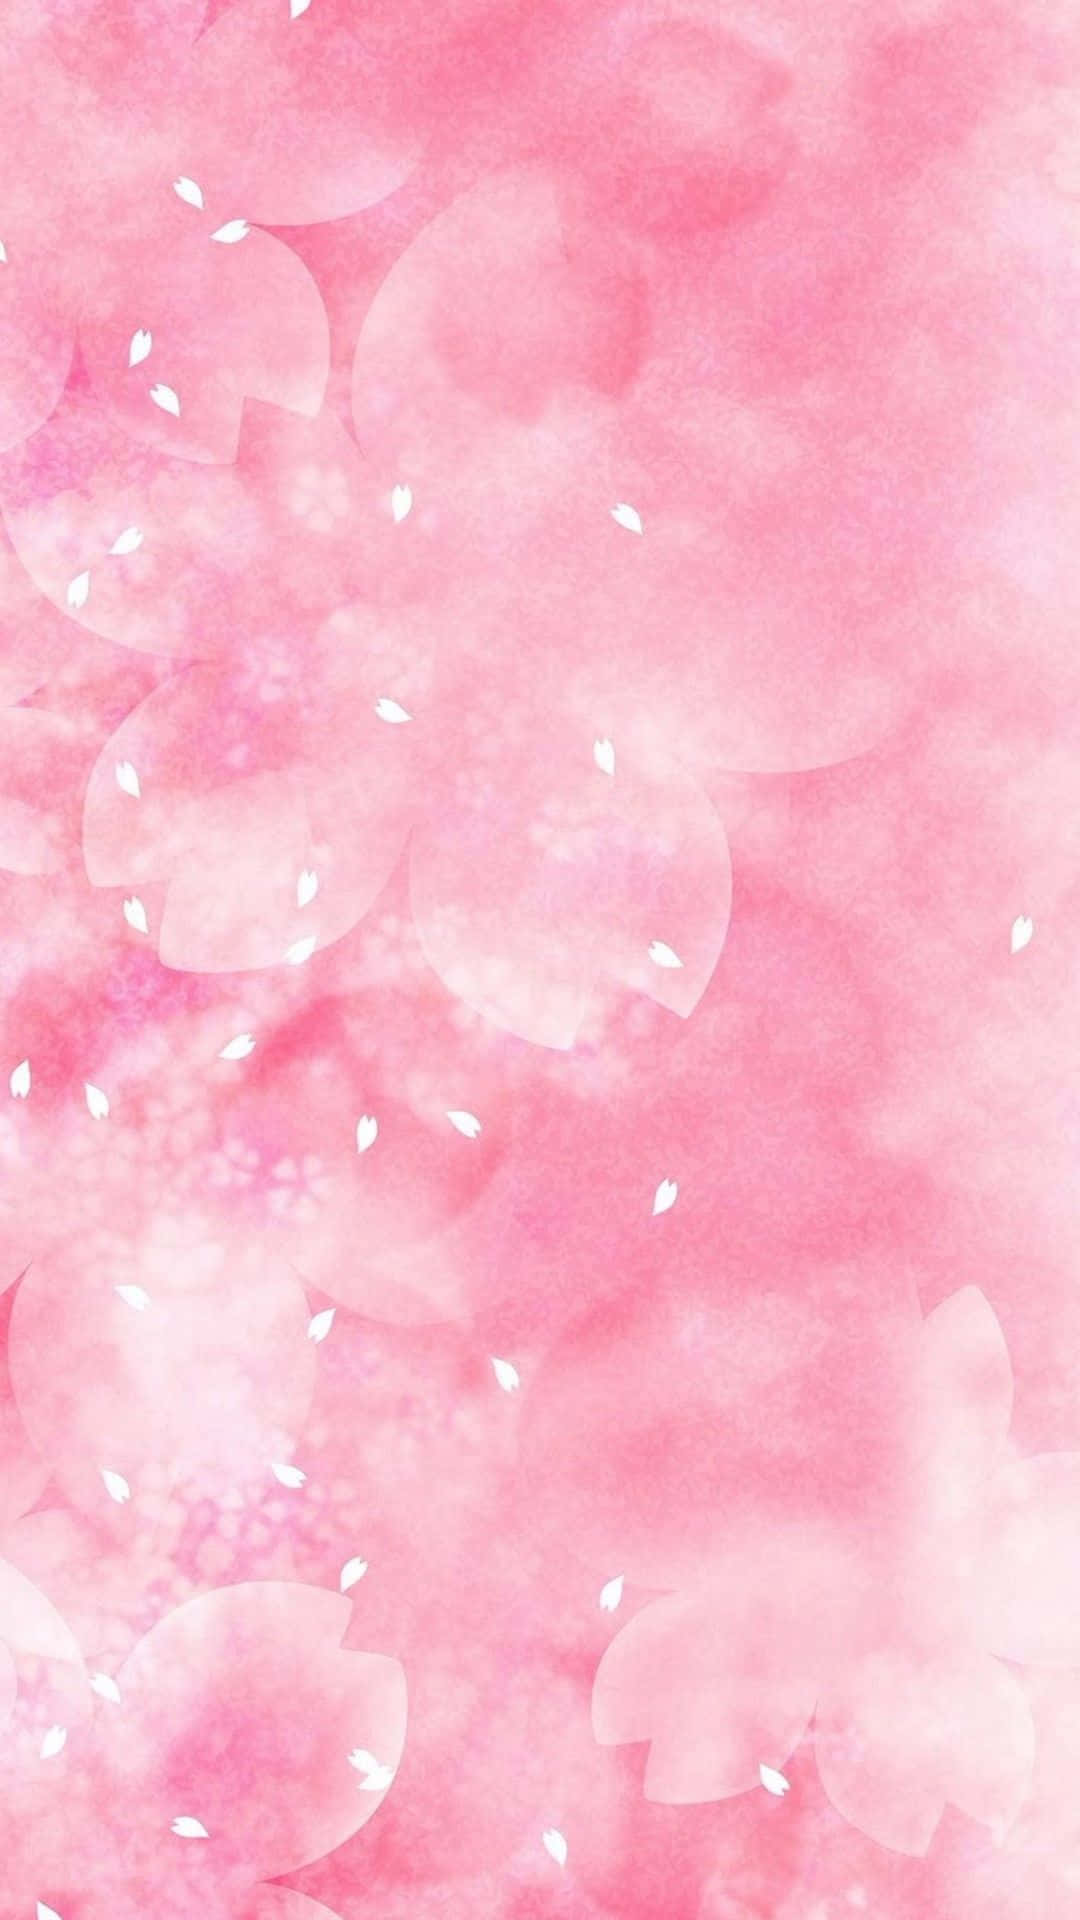 A Pink Watercolor Background With White Flowers